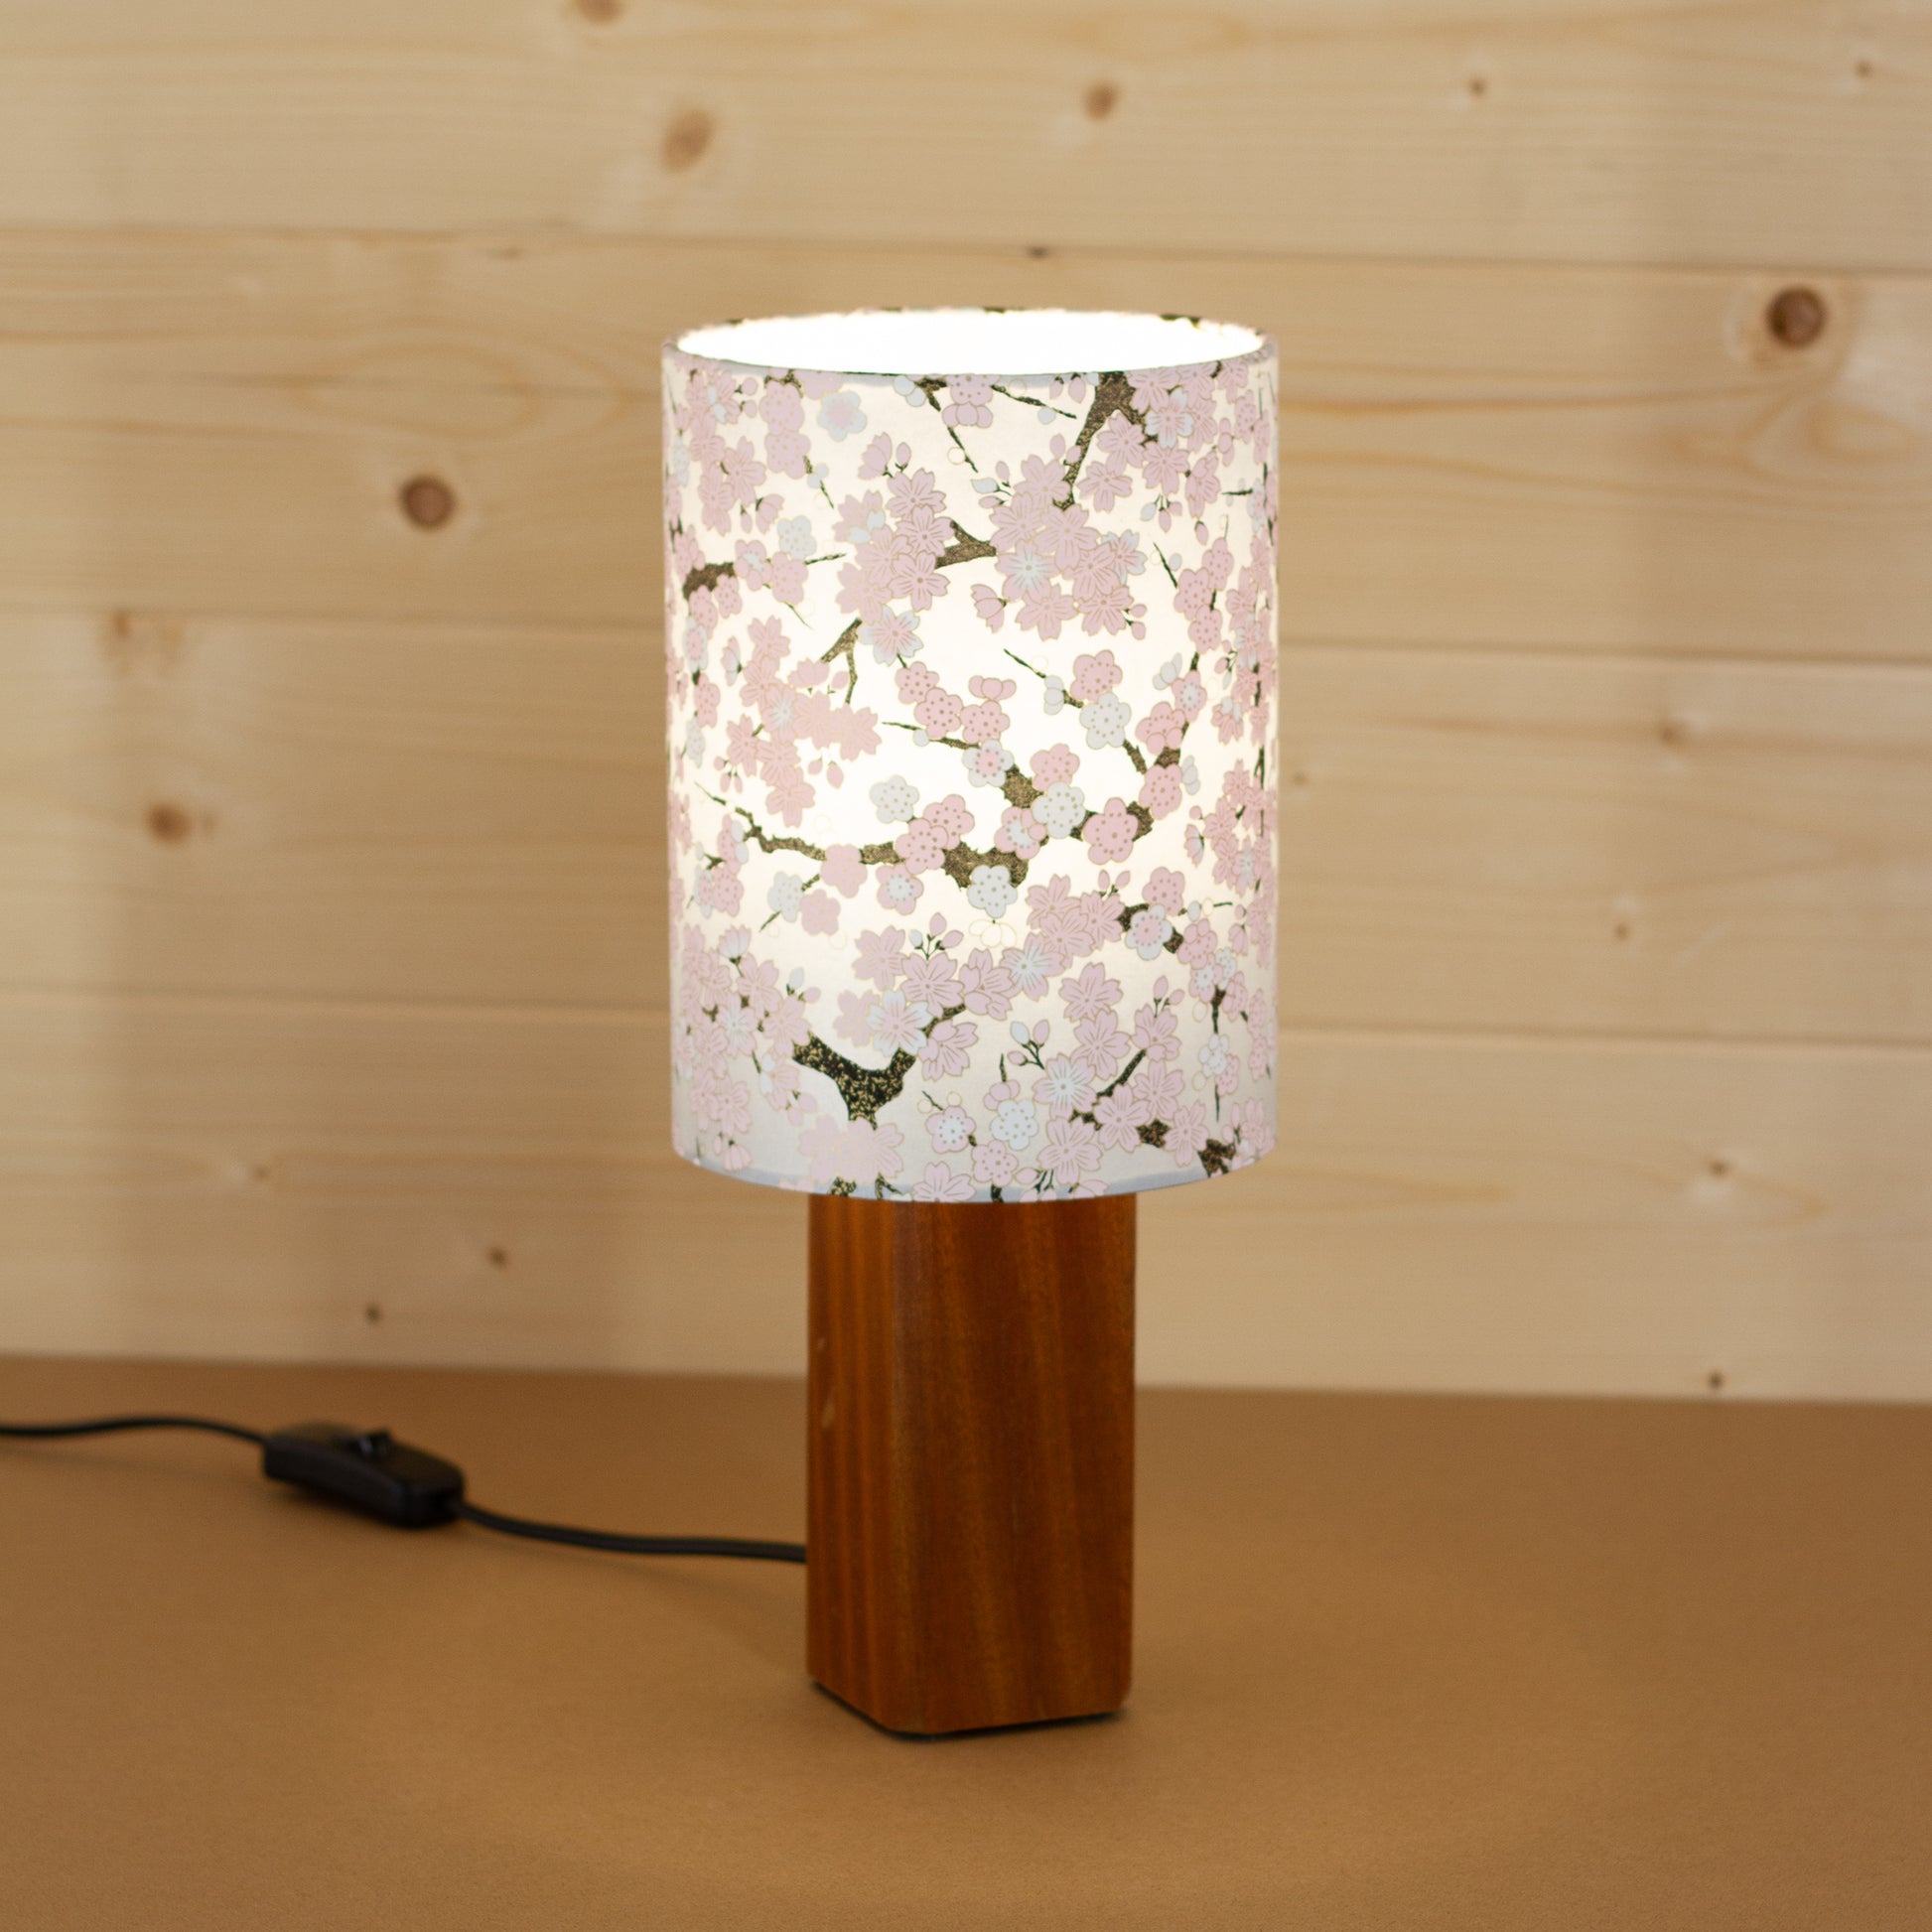 Lit Cherry Blossom Lampshade on Square Sapele Table Lamp base, Handmade by Imbue Lighting on the Isle of Anglesey